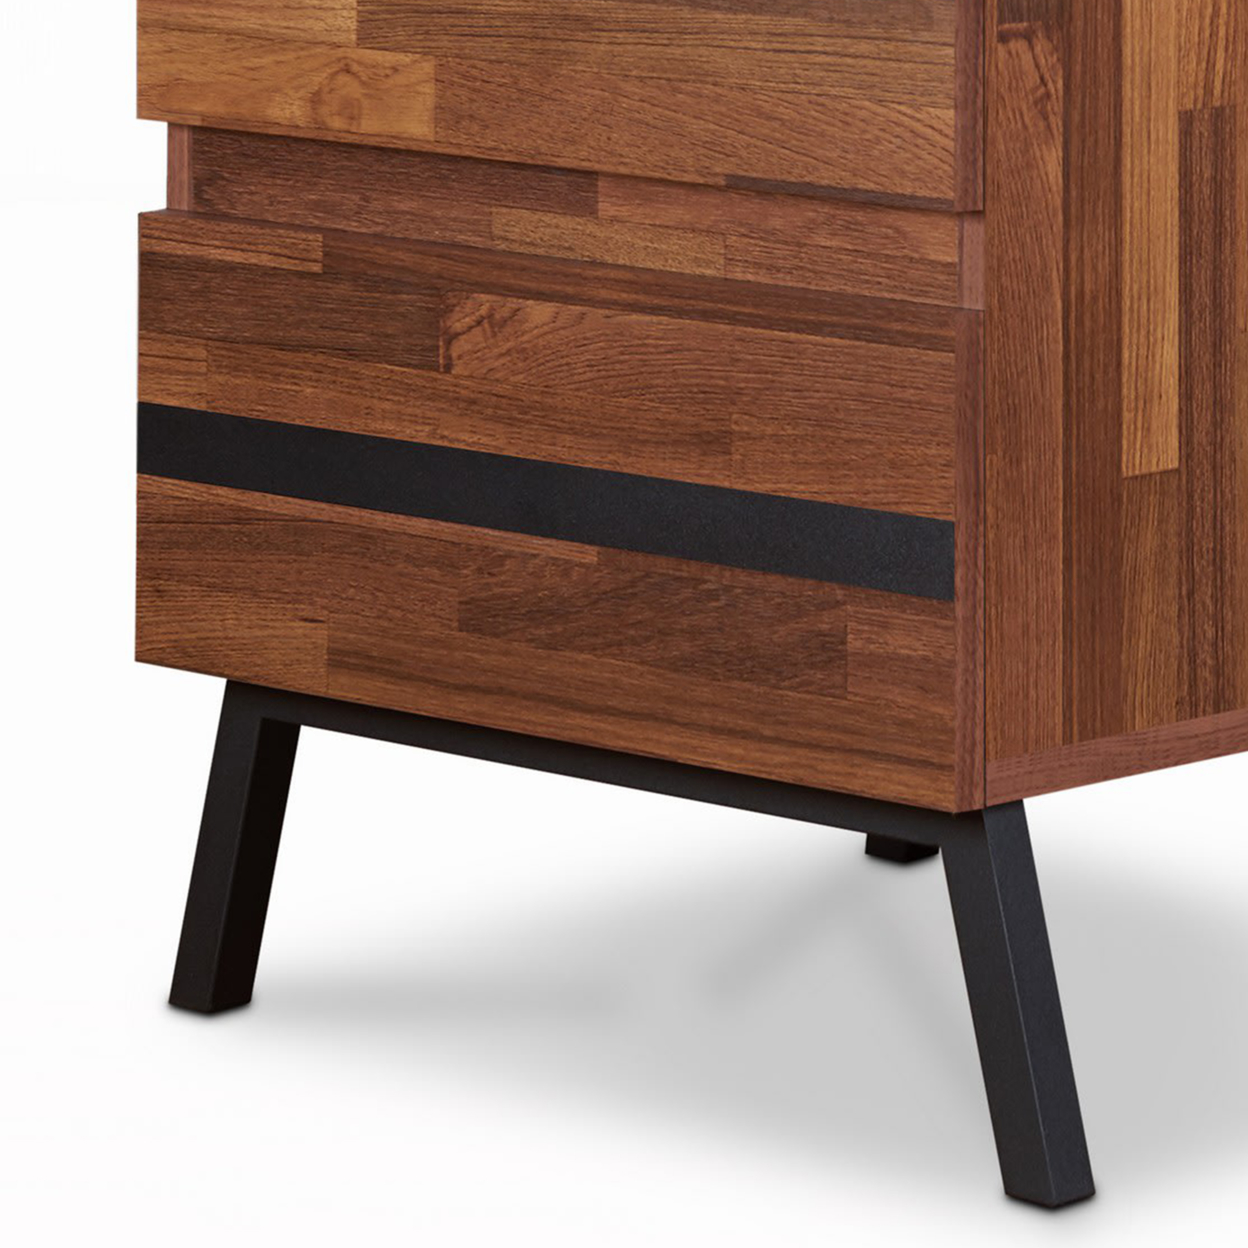 Two Drawers Wooden End Table With Angled Leg Support, Brown And Black- Saltoro Sherpi